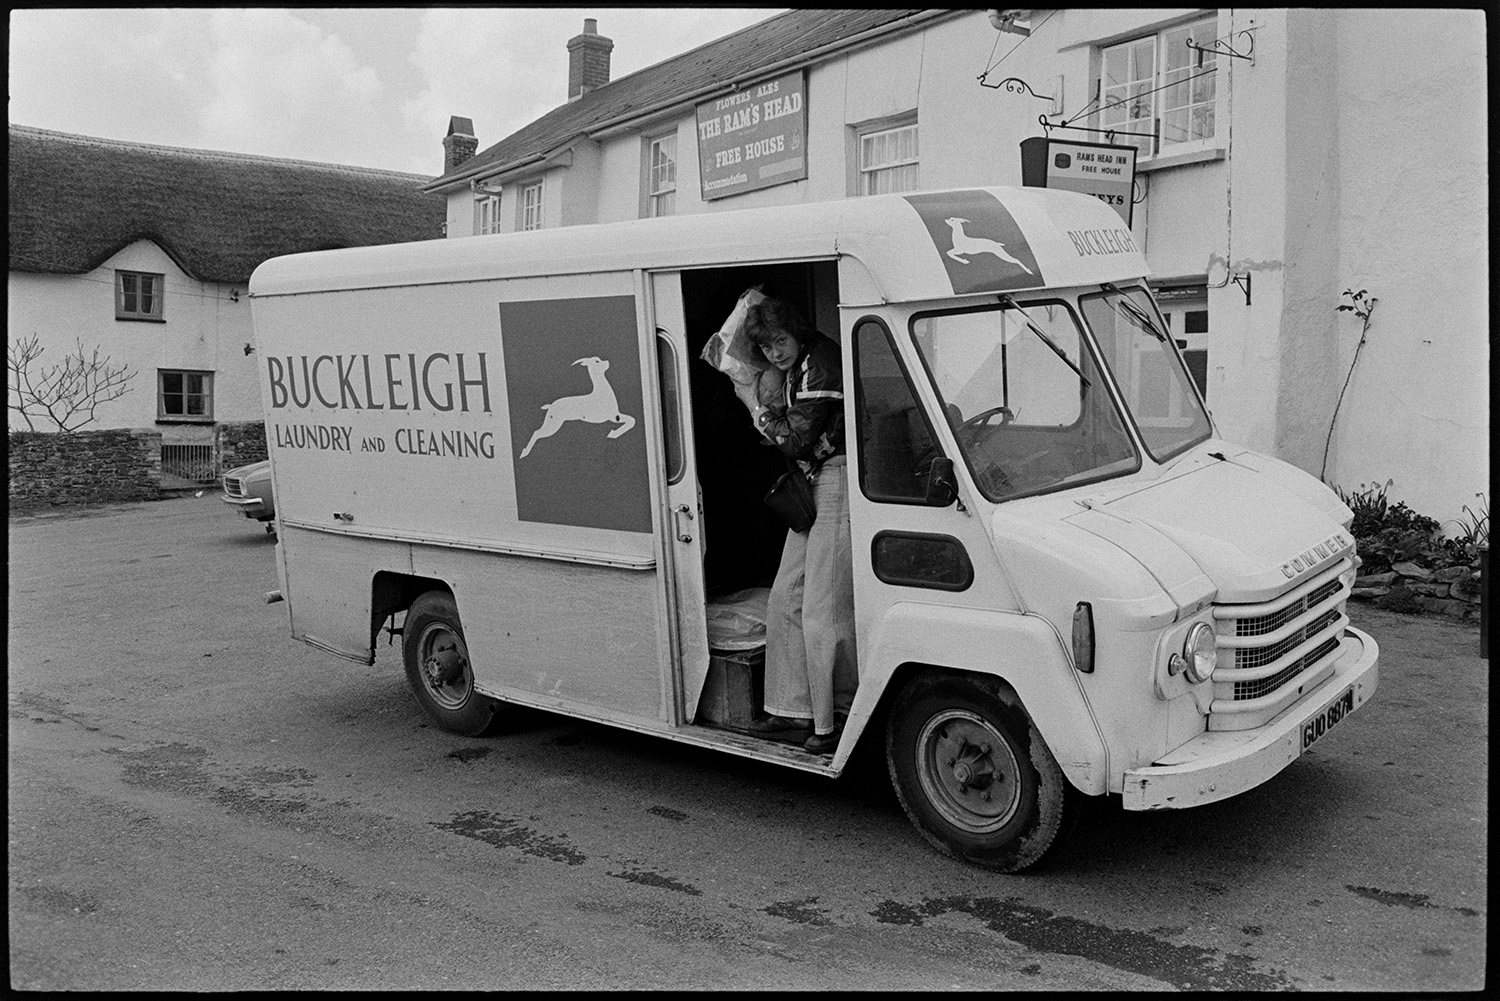 Laundry van parked in village, man delivering. 
[A person delivering laundry from a Buckleigh Laundry and Cleaning van, outside The Rams Head pub in Dolton.]